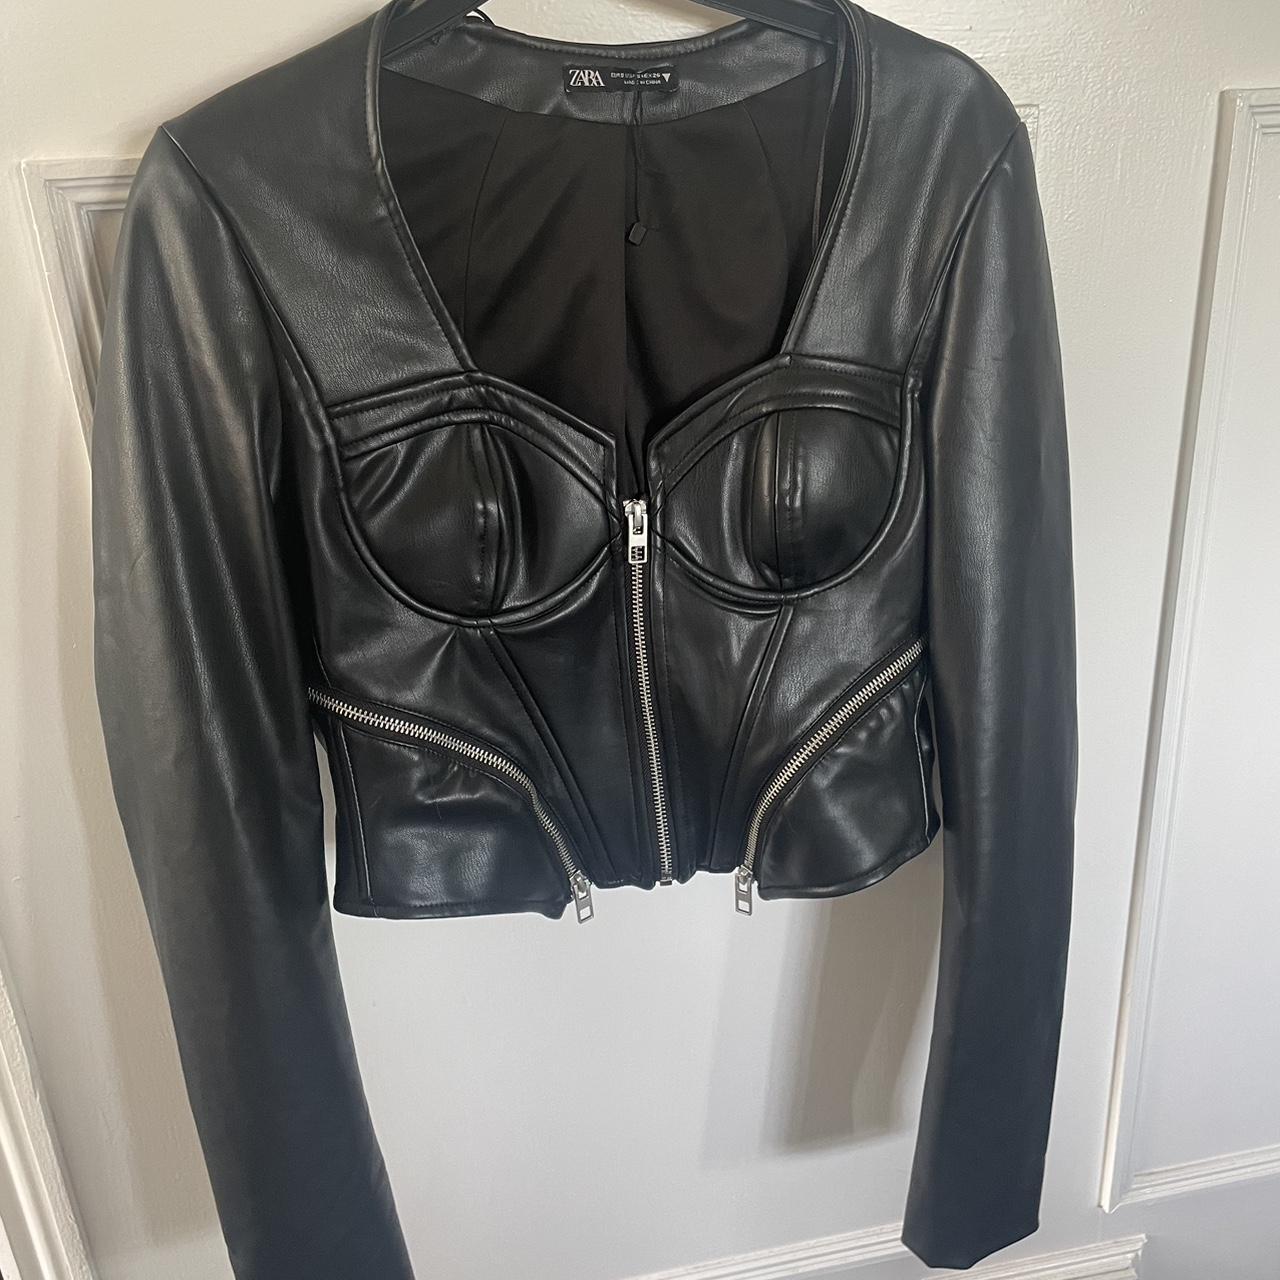 A Corset Top: Zara Corsetry Faux Leather Top